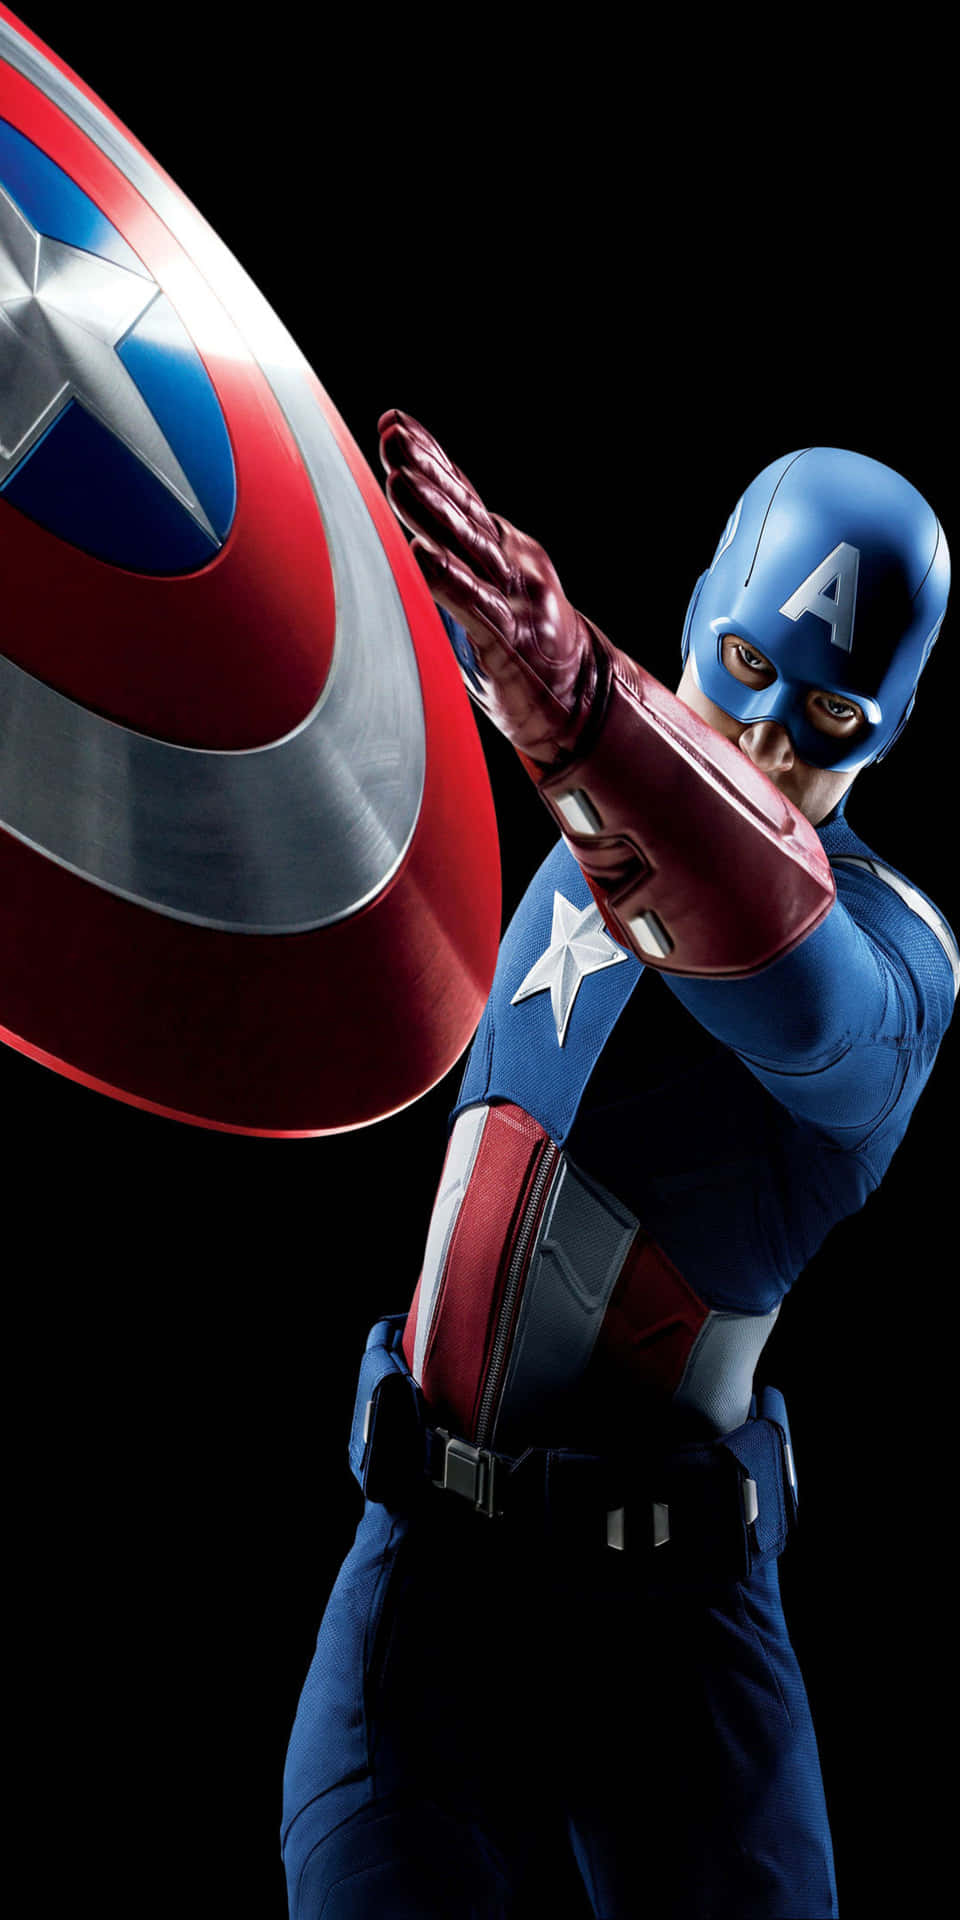 "A high-resolution wallpaper of Captain America made just for Pixel 3".